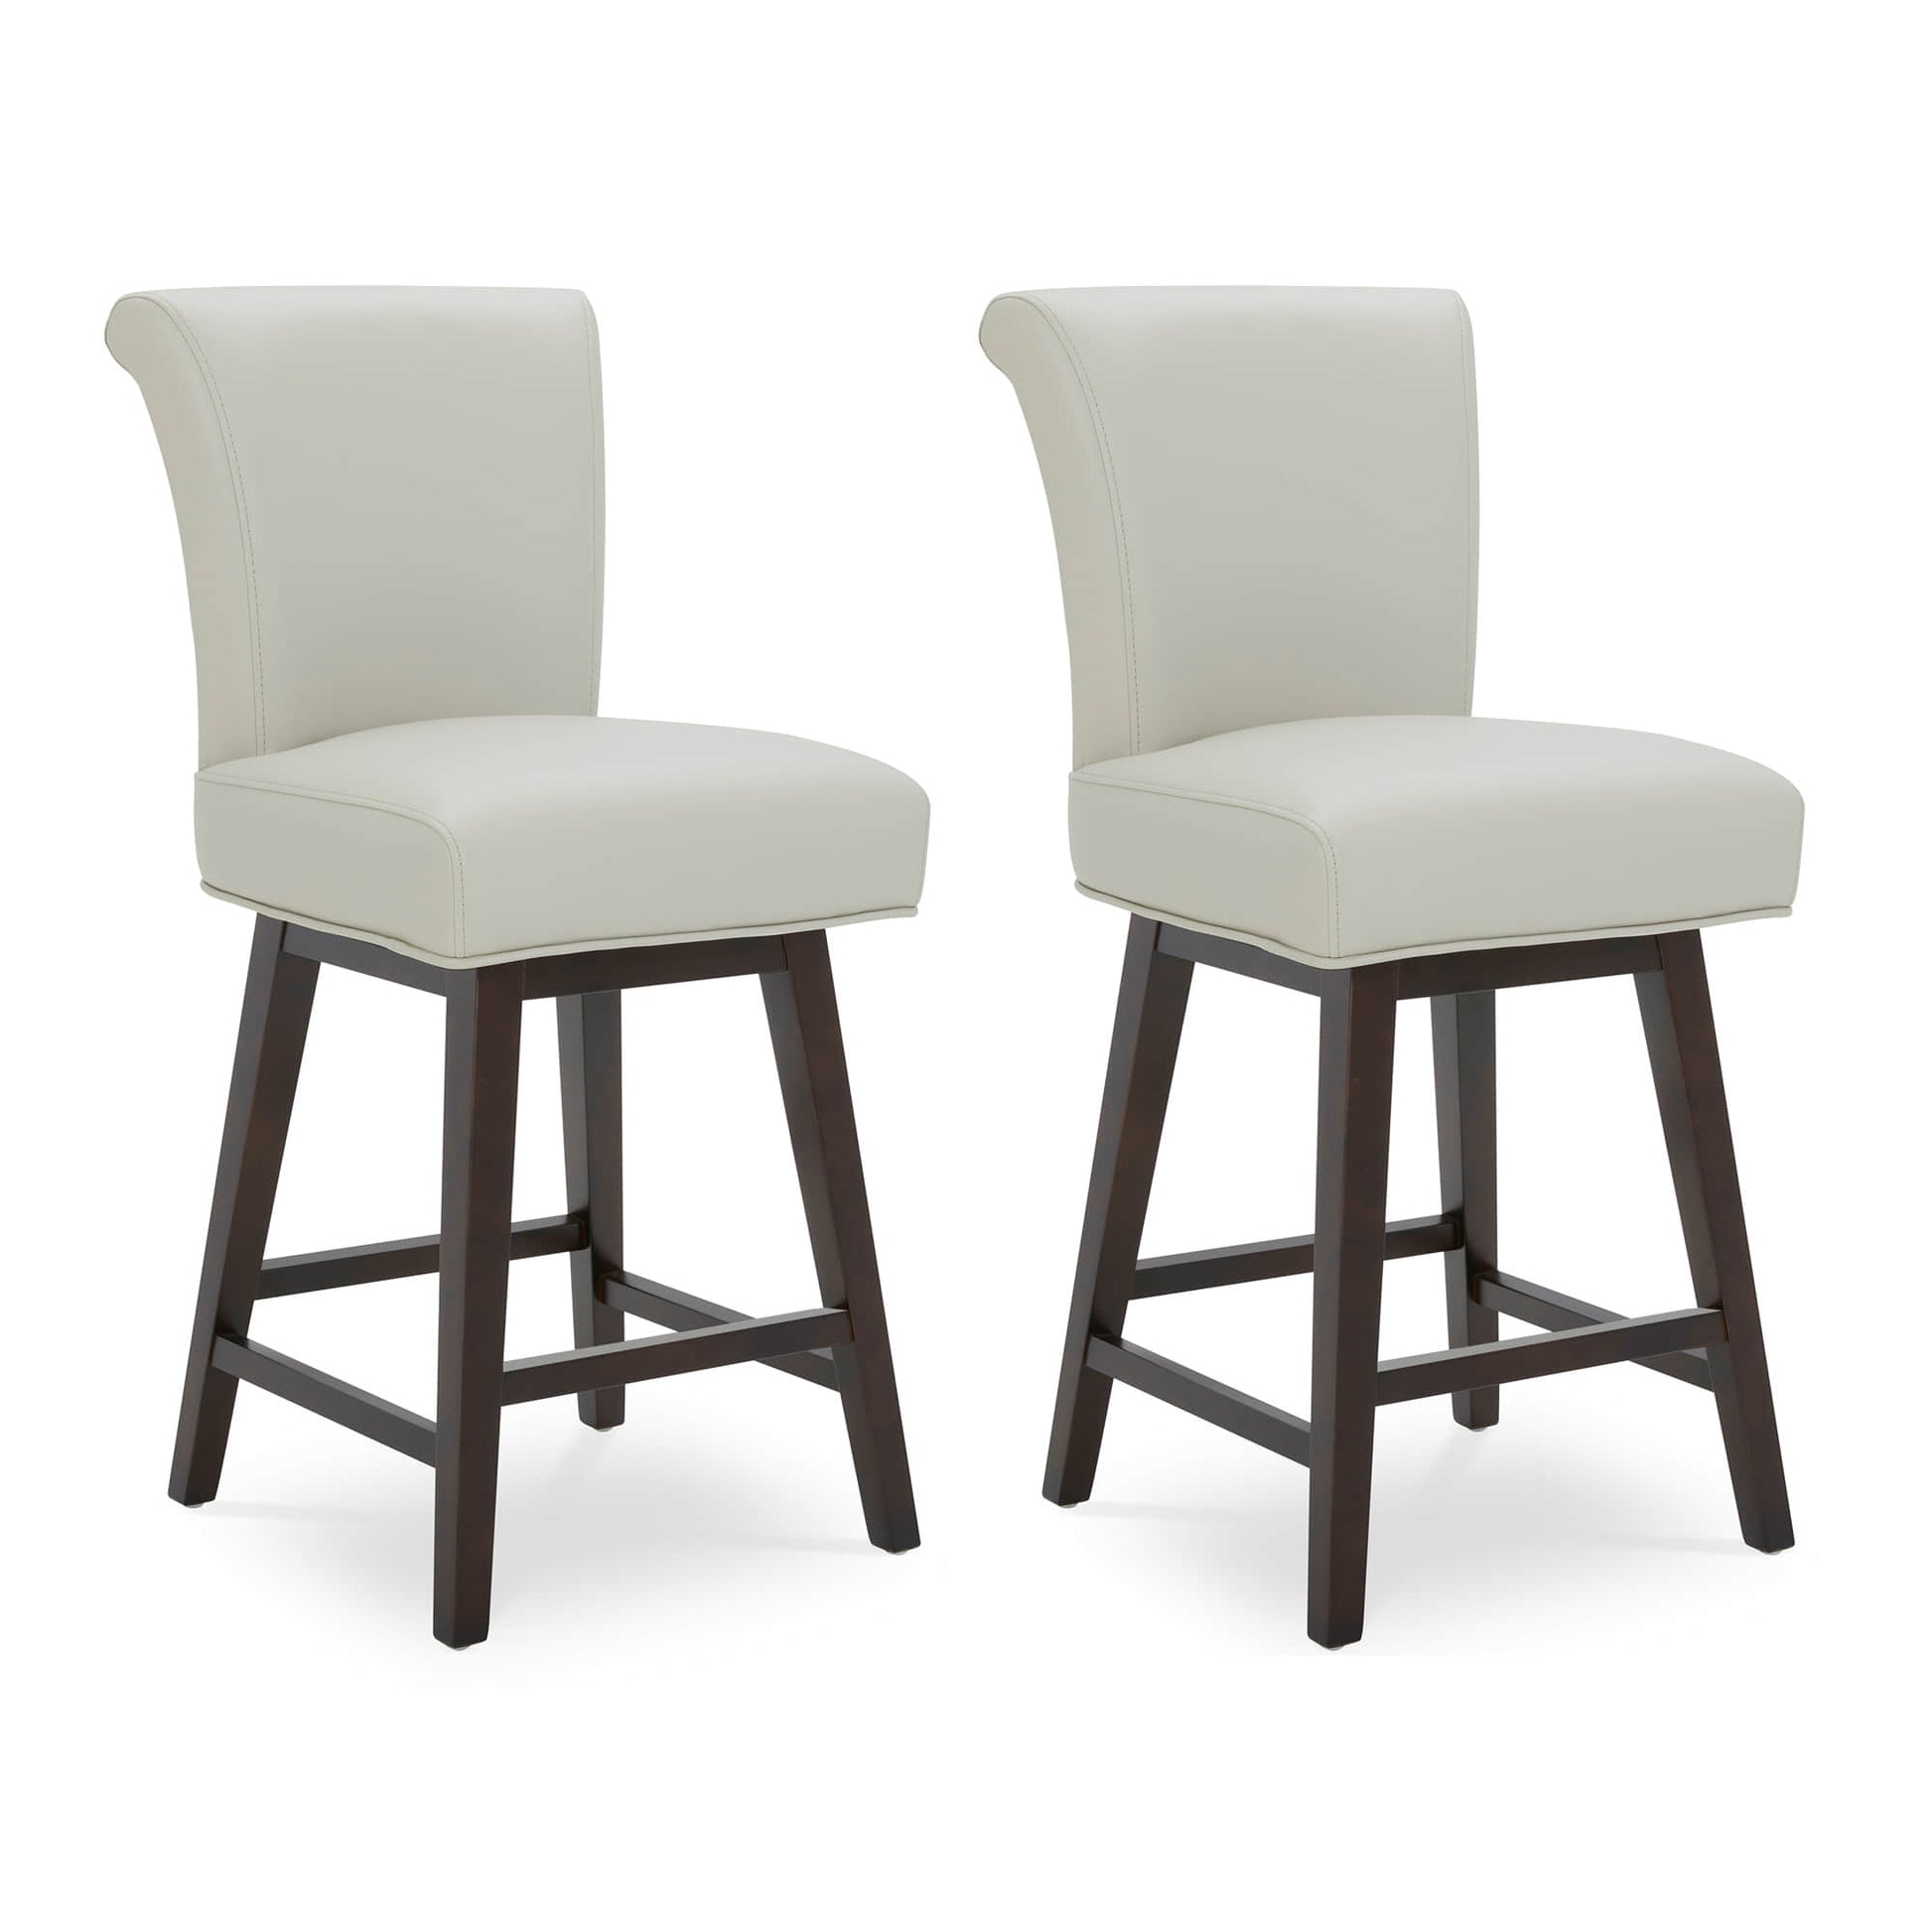 CHITA LIVING-Alina Modern Swivel Counter Stool-Counter Stools-Faux Leather-Light Gray-2-Pack